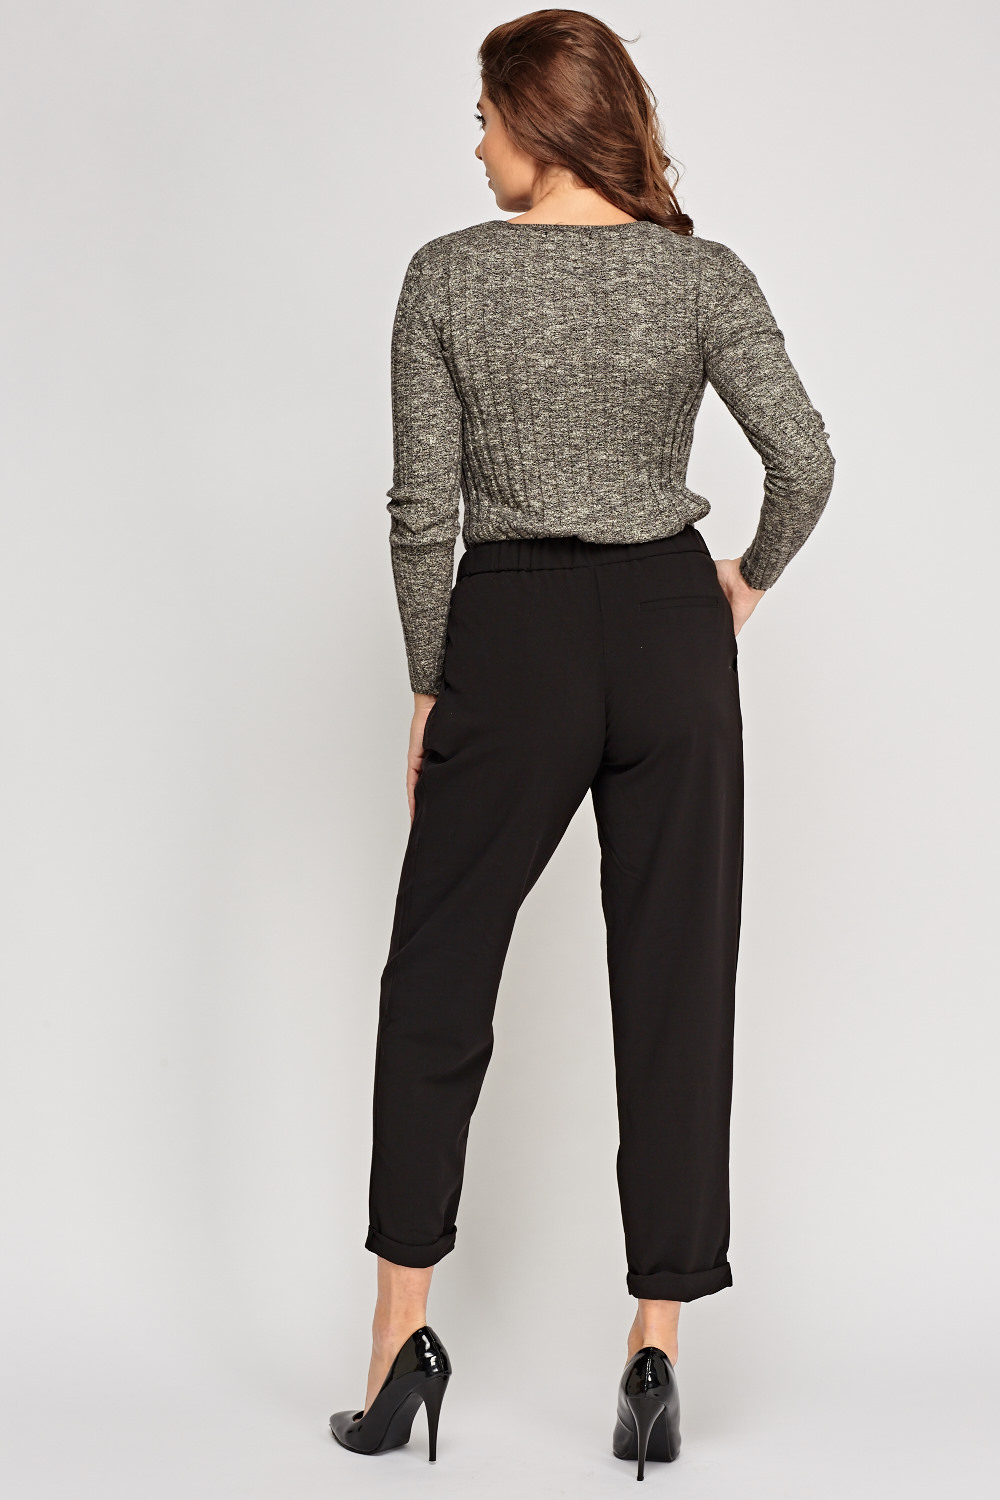 Straight Leg Black Cropped Trousers - Just $7